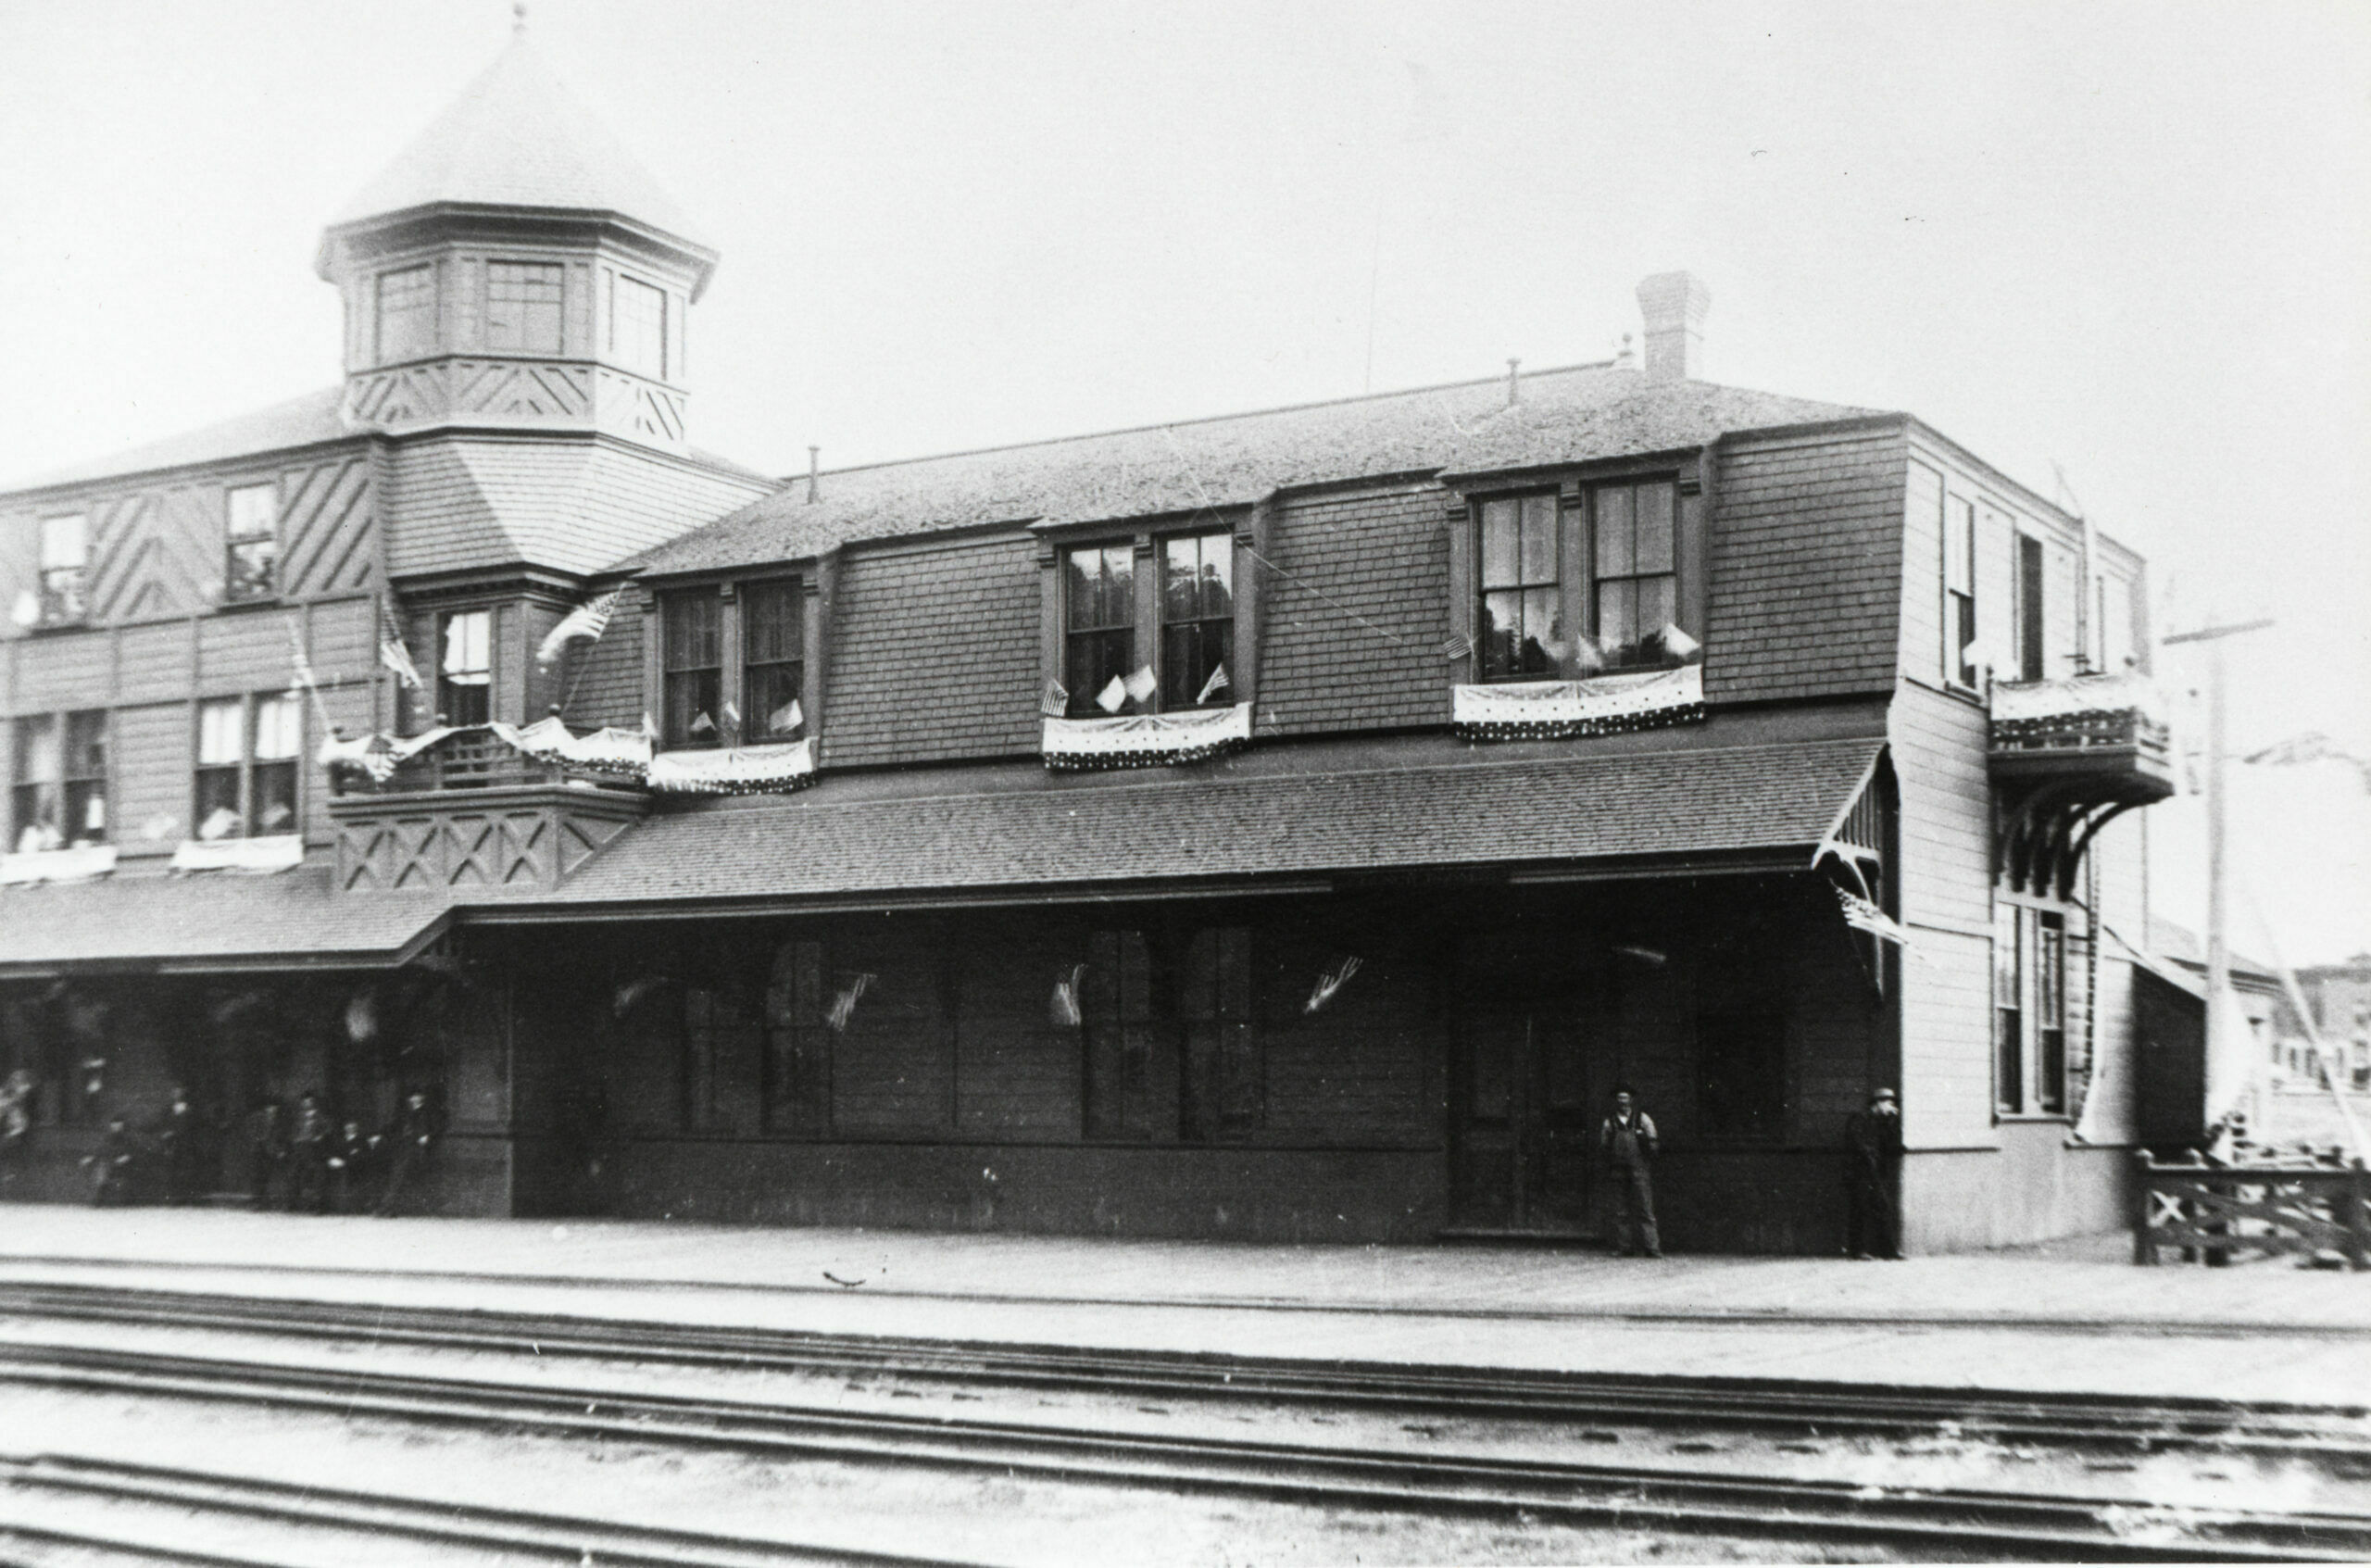 The Hotel Monte Christo was decorated with American flags and bunting in commemoration of the Fourth of July. The lunchroom occupied this wing of the hotel, and the main entrance was to the left, where some gentlemen were relaxed under the canopy. By 1890, standard-gauge rail had reached Salida, and dual-gauge track was clearly visible here.  (2)